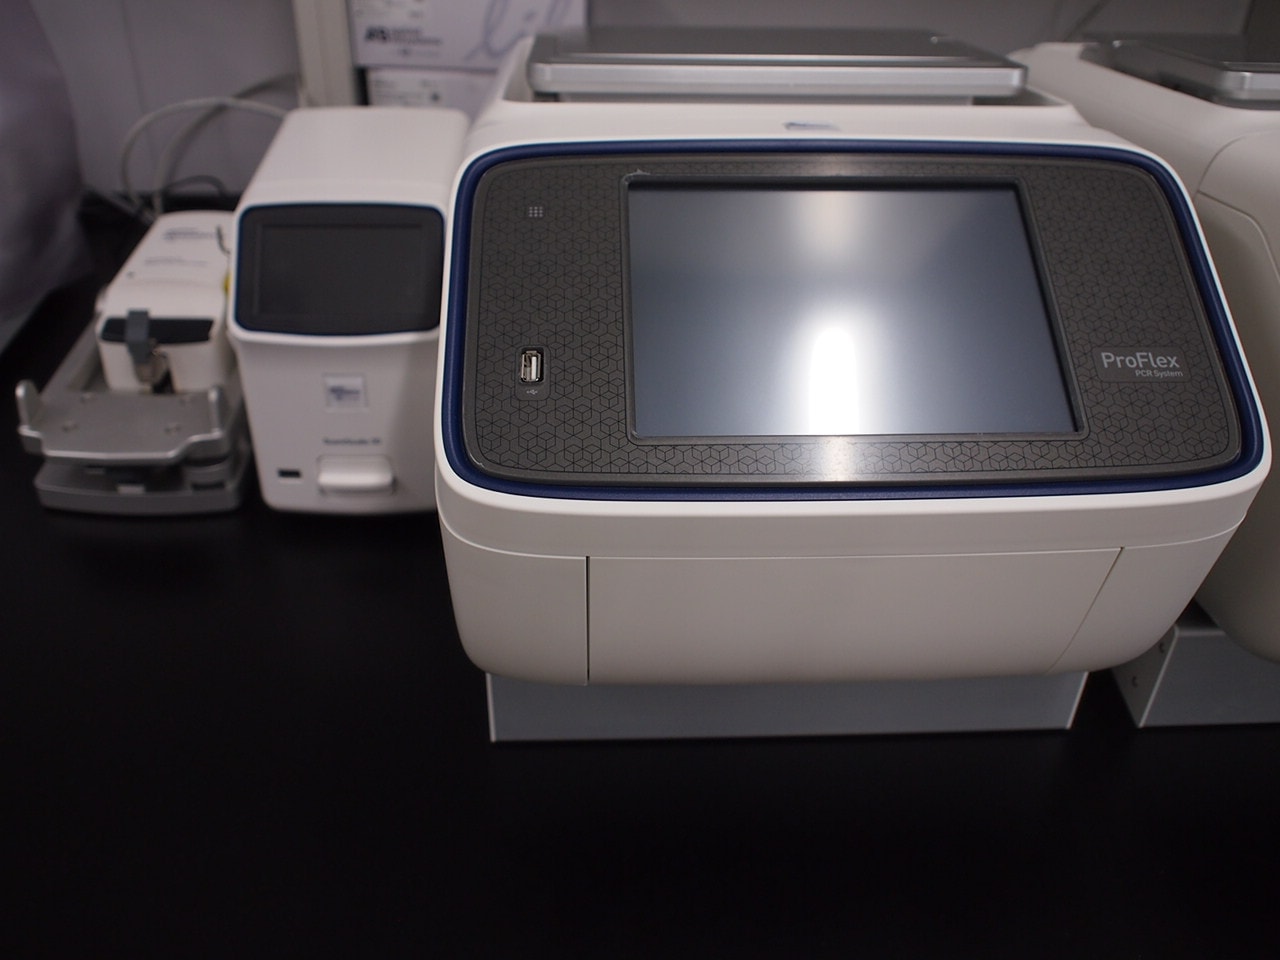 Thermo ProFlex PCR System